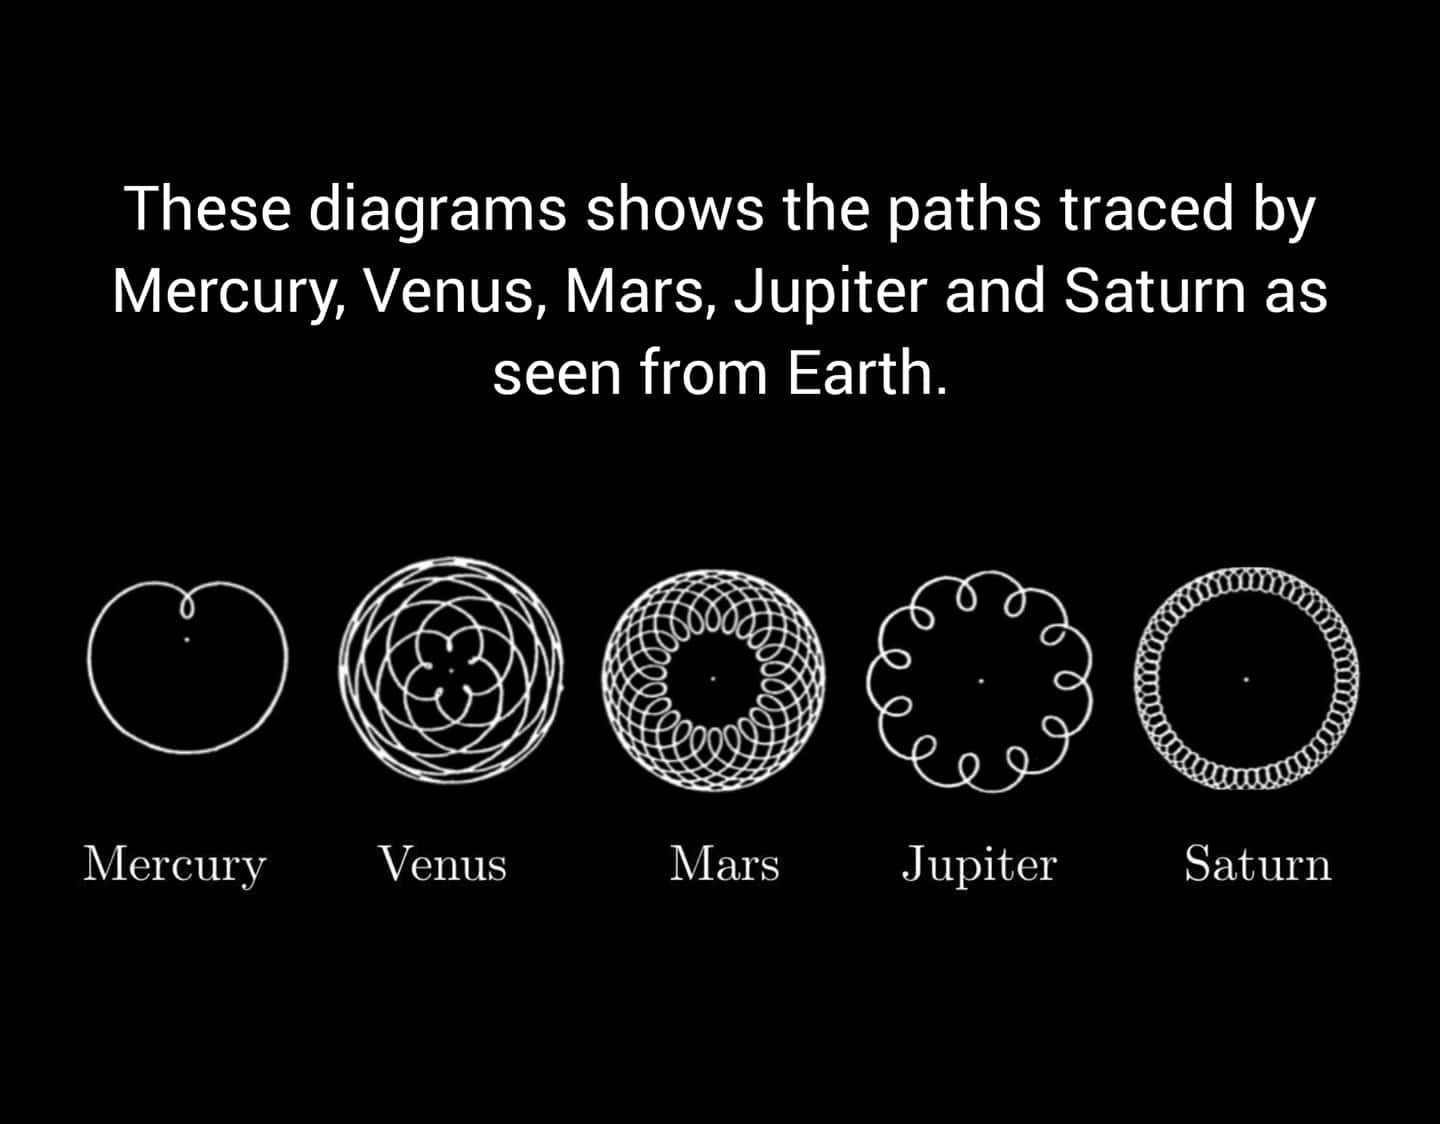 these diagrams show the paths traced by mercury, venus, marcs, jupiter and saturn as seen from earth